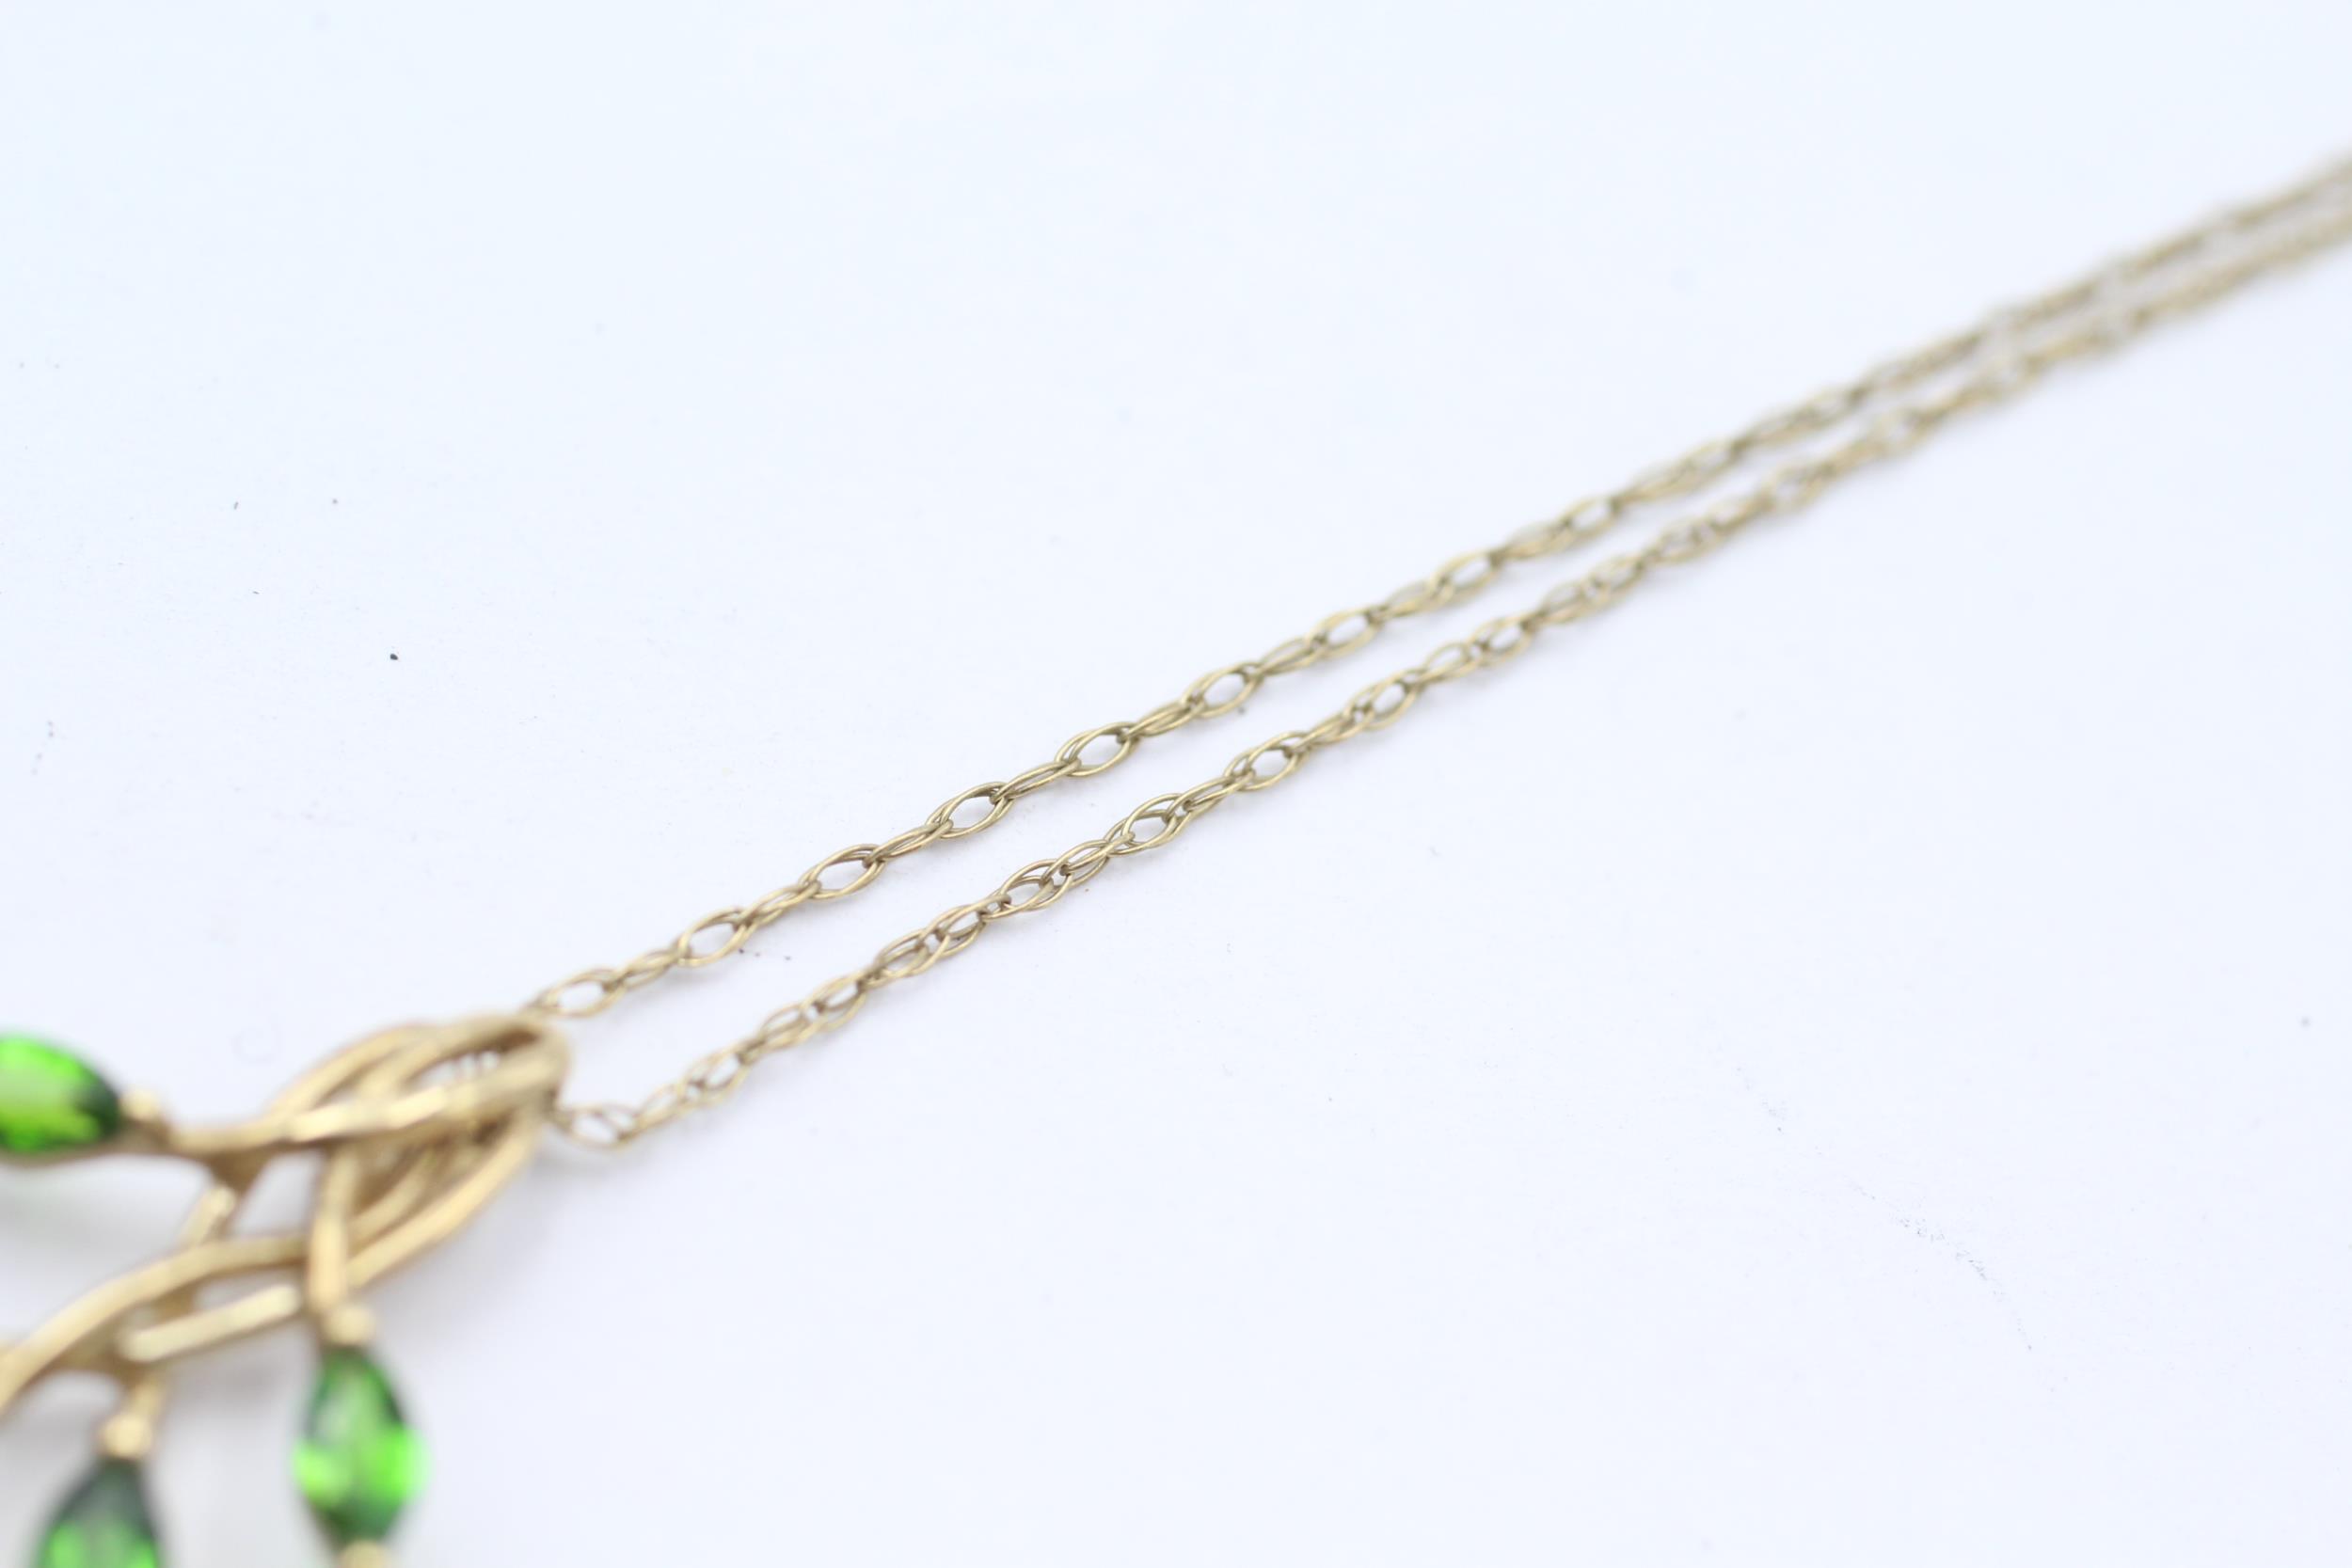 9ct gold diopside necklace - 2.2 g - Image 3 of 4